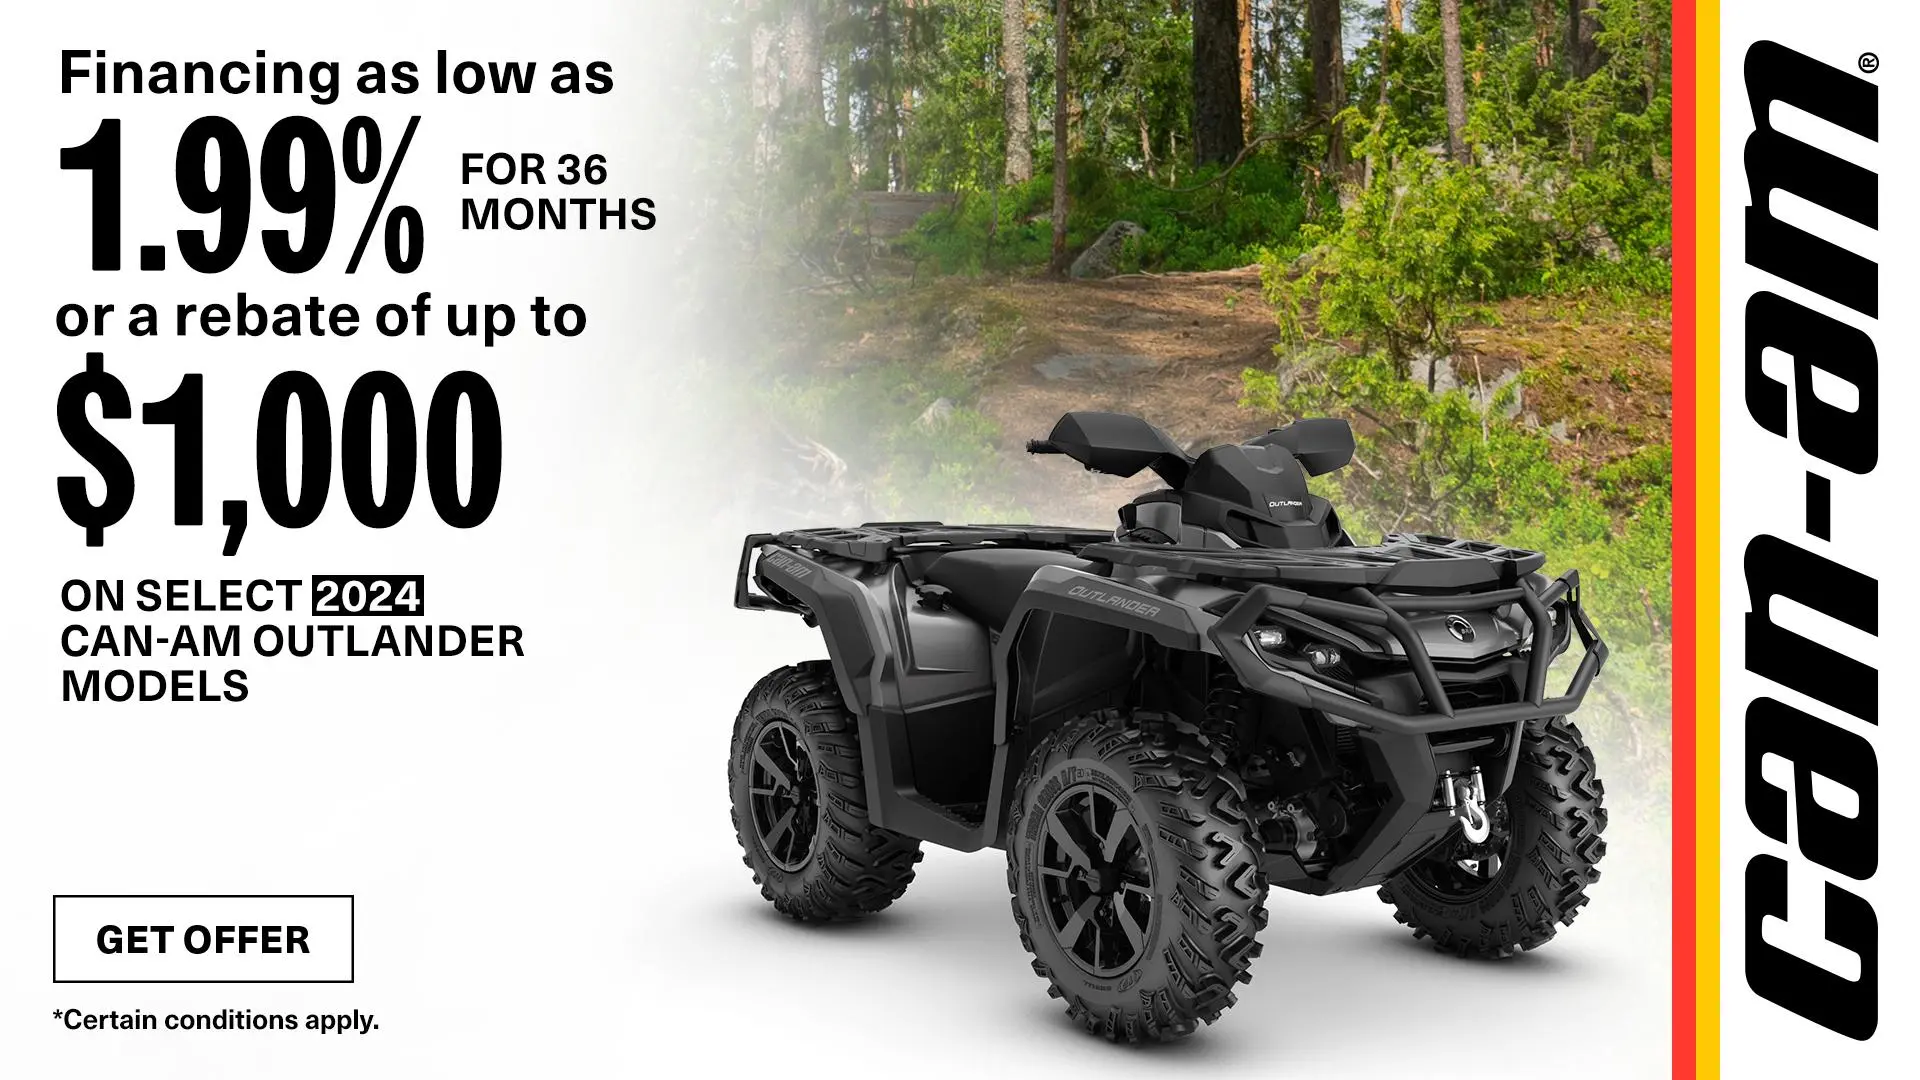 Financing as low as 1.99% for 36-months or up to $1,000 rebate on select 2024 Can-Am Outlander models